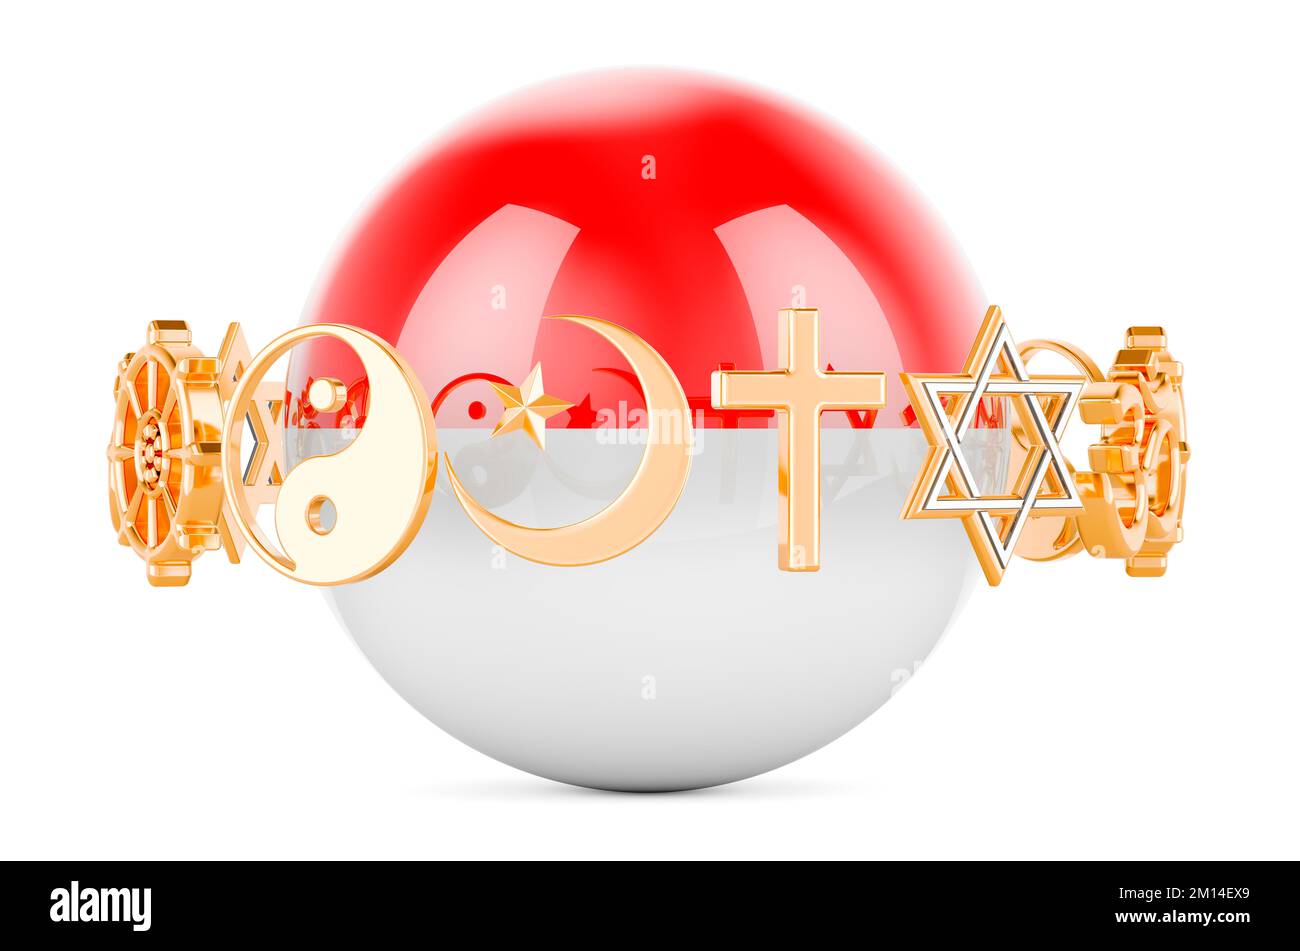 Indonesian, Monacan flag painted on sphere with religions symbols around, 3D rendering isolated on white background Stock Photo